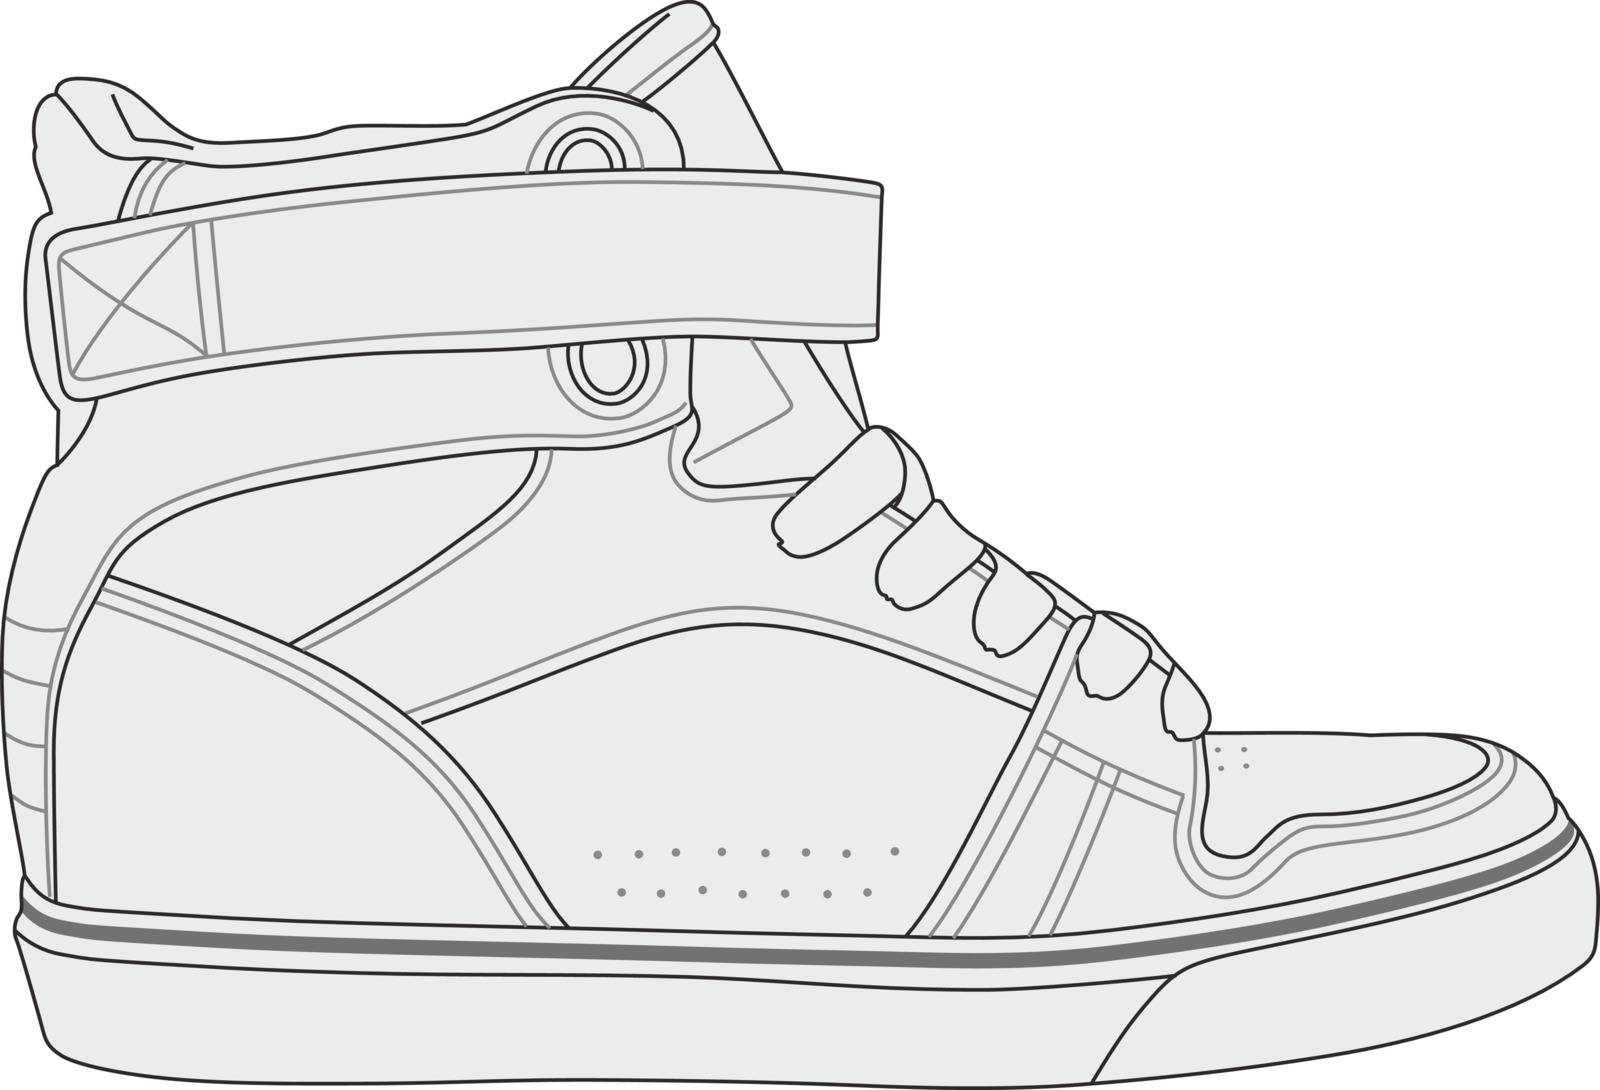 Simple black and white vector illustration of modern stylish sneakers